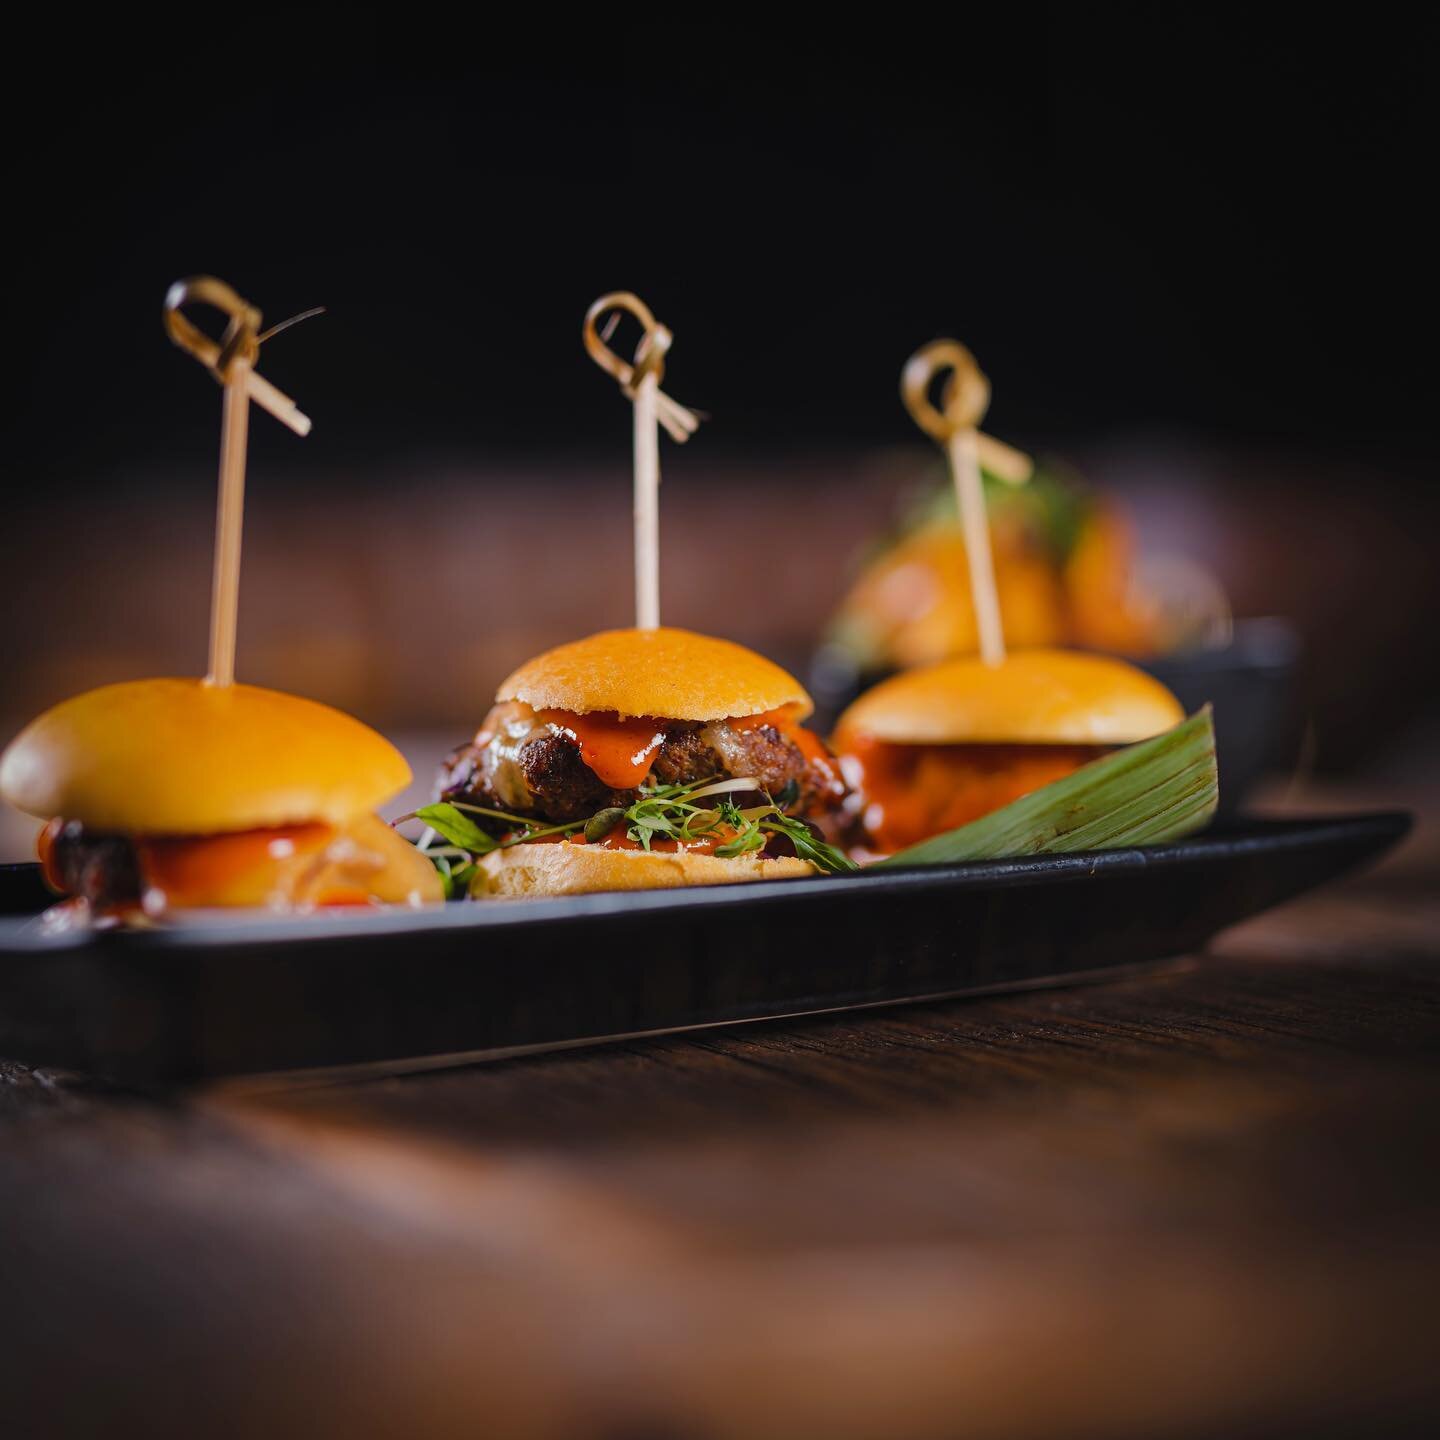 Our juicy mini burger sliders 🍔 Prime Angus beef x spicy teryaki mayo. Ready and waiting for you when you break your fast ❤️ 

We open from 7pm

Book your table at N&Ouml;A ✨
Visit www.noalounge.com to reserve your table. On the day bookings, please